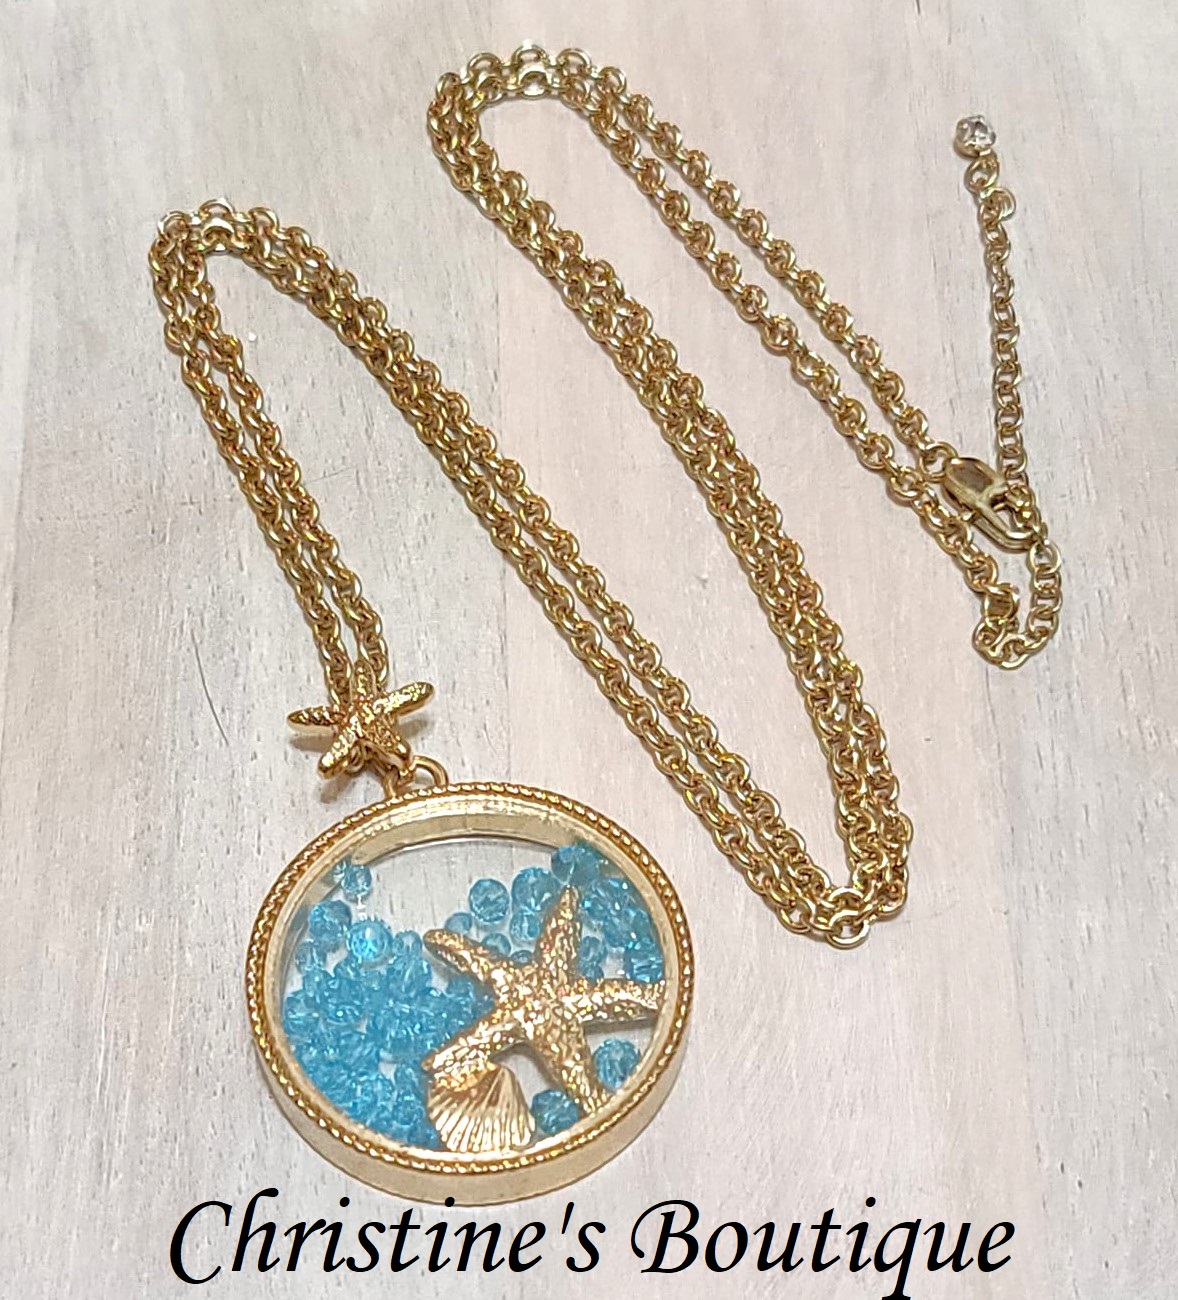 Sea Life pendant necklace, with austrian crystals and starfish theme